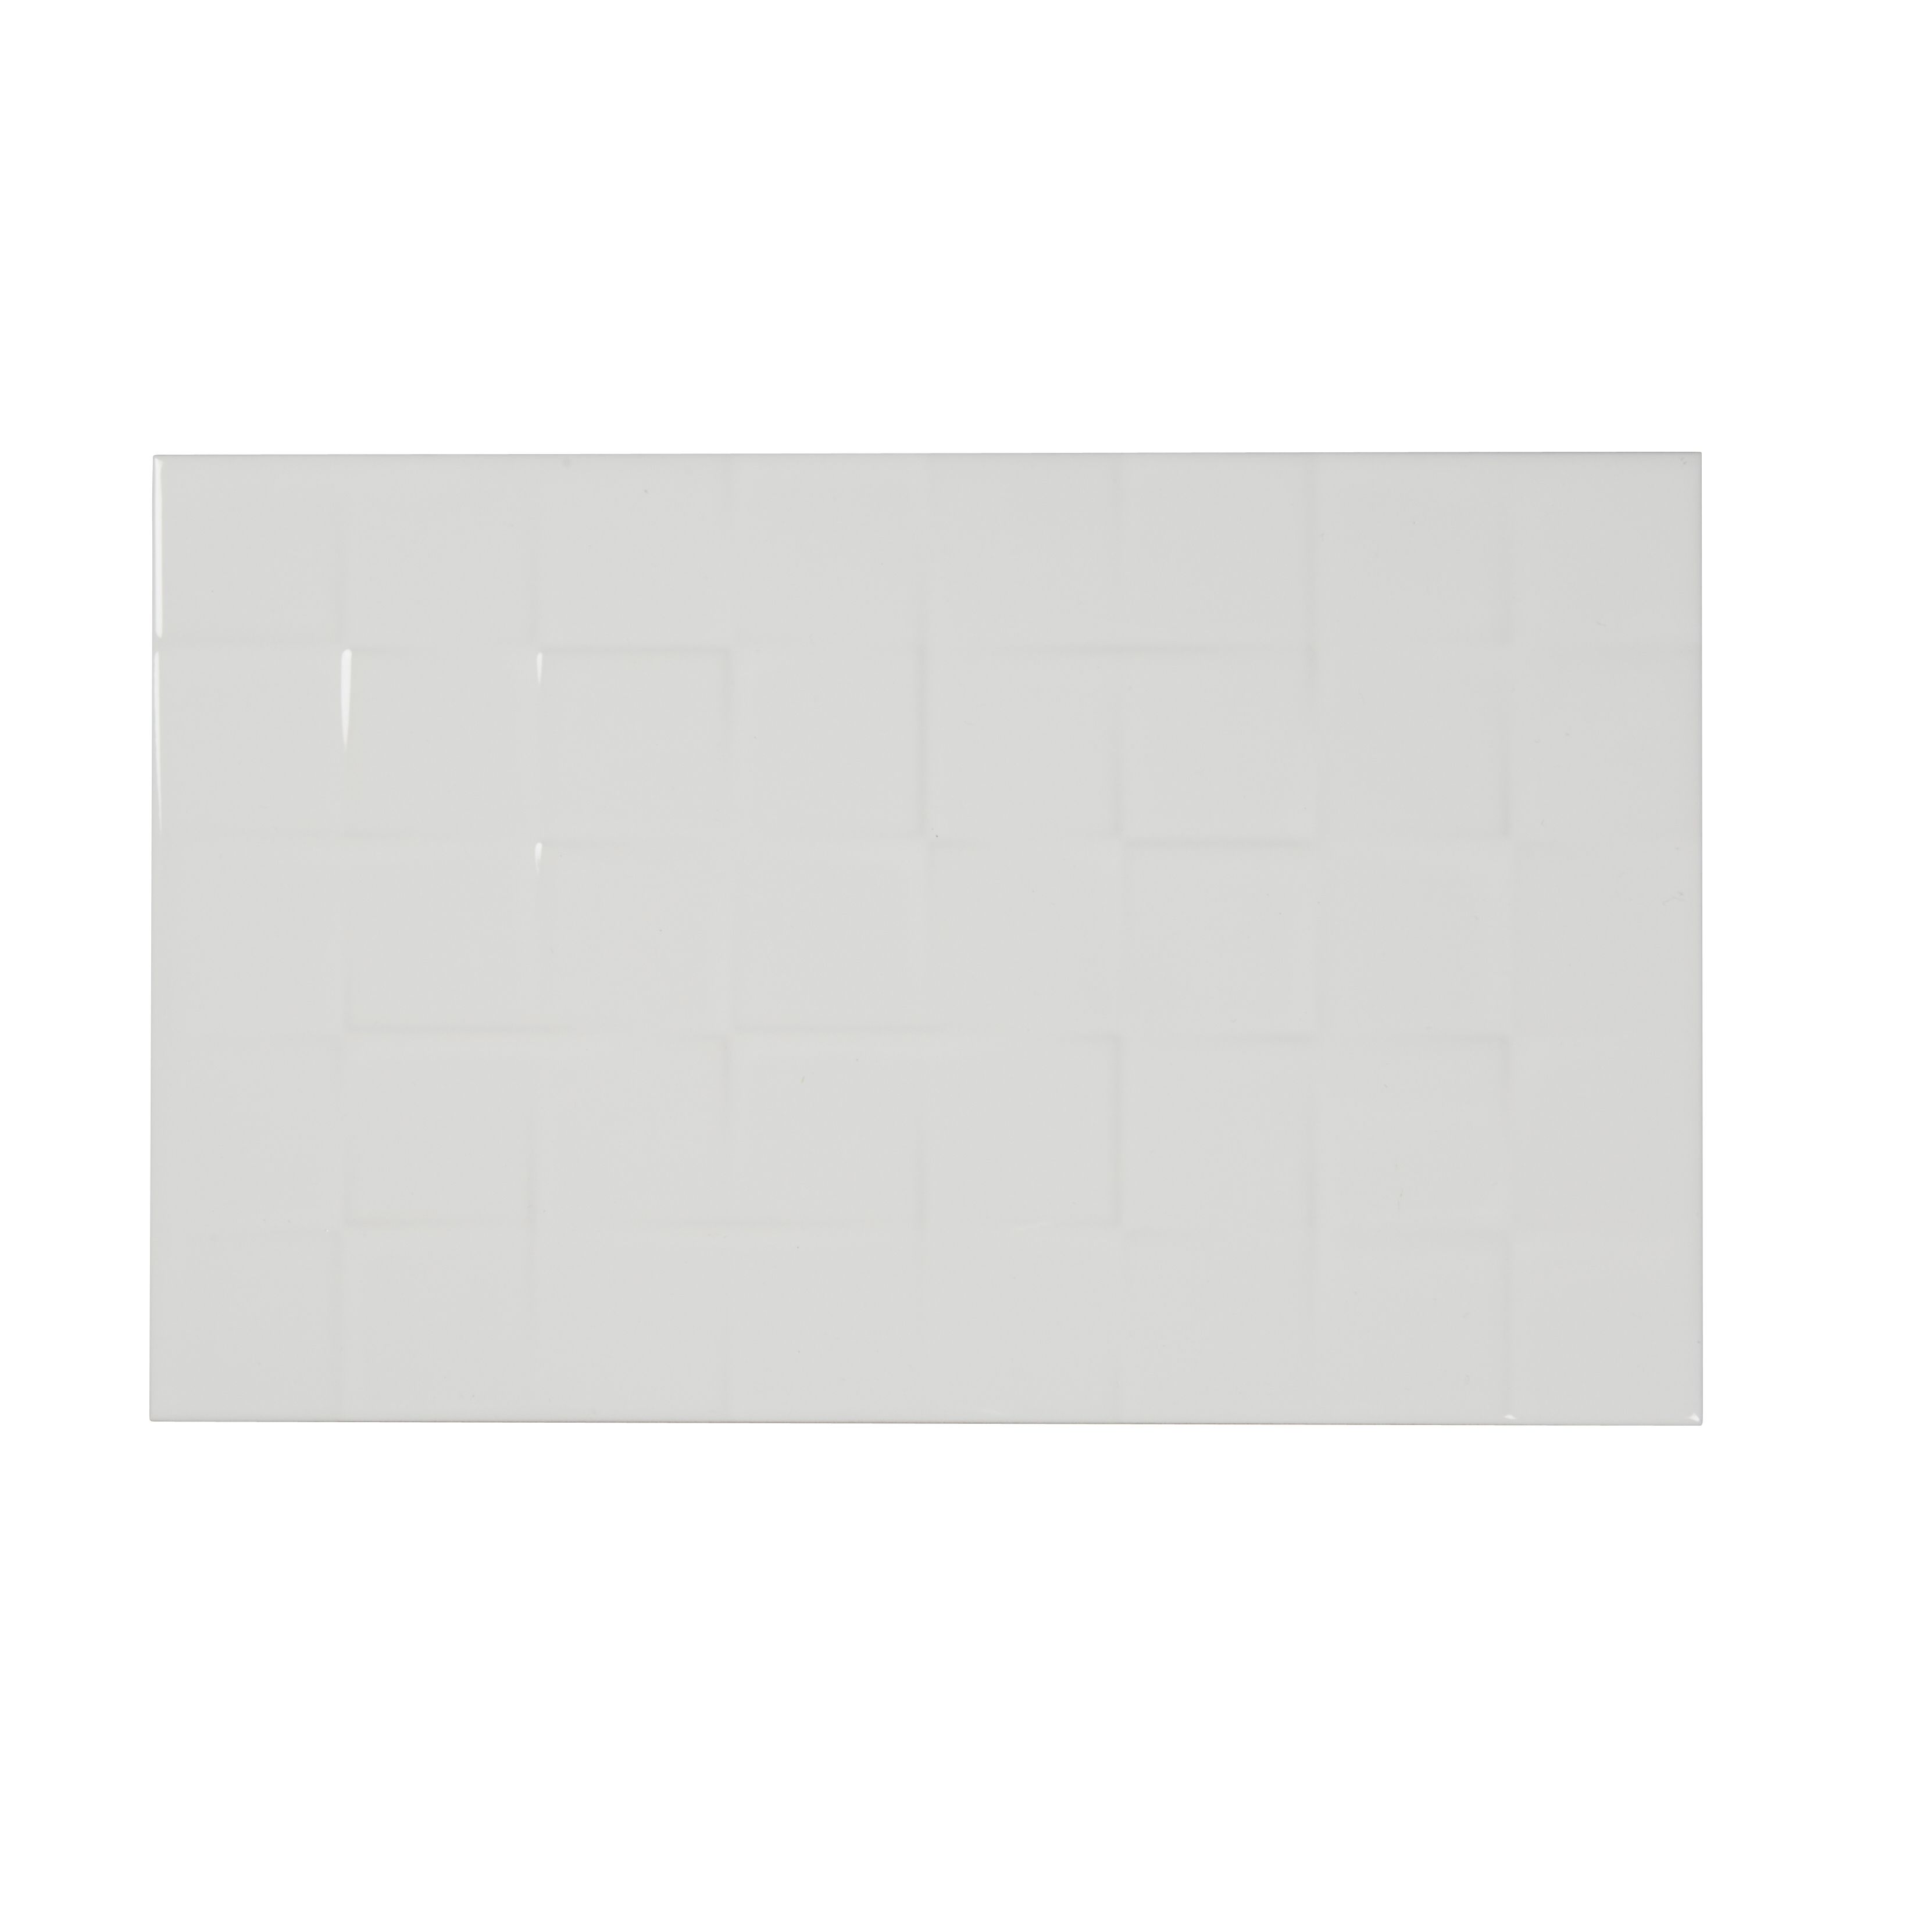 Alexandrina White Gloss Flat Ceramic Indoor Wall Tile, Pack of 10, (L)402.4mm (W)251.6mm